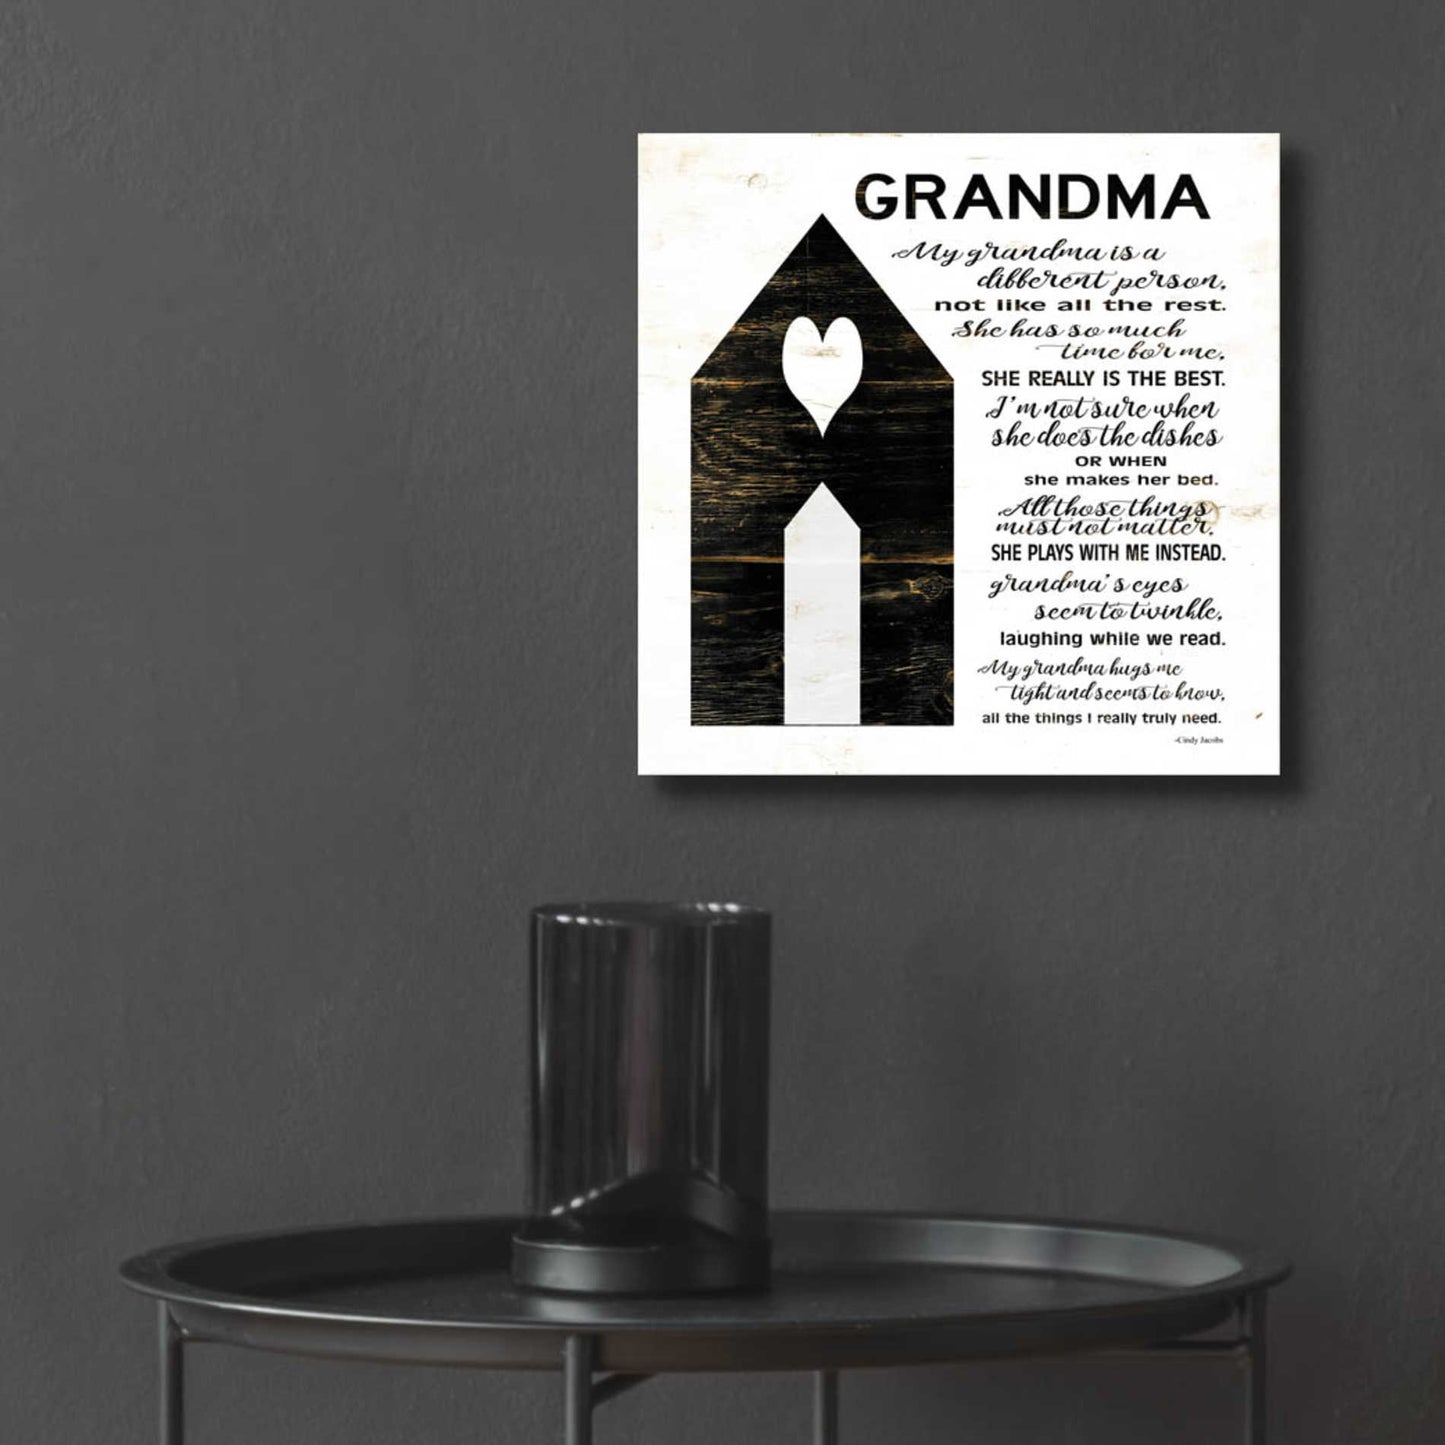 Epic Art 'My Grandma is the Best' by Cindy Jacobs, Acrylic Glass Wall Art,12x12